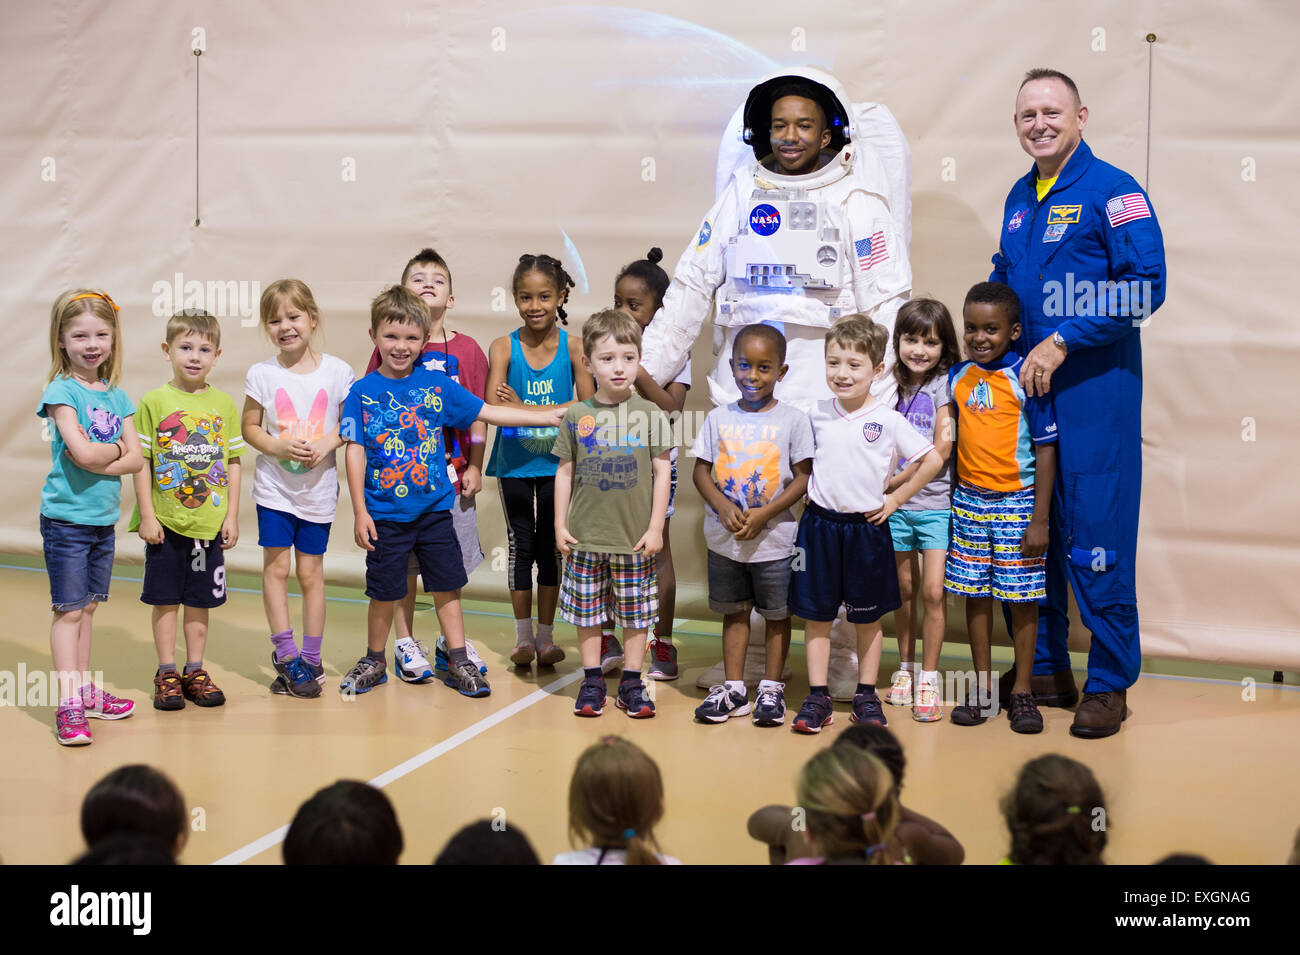 Astronaut Barry &quot;Butch&quot; Wilmore poses for a group photo with a teacher and his students on Wednesday, June 24, 2015 at the Joint Base Anacostia-Bolling Summer Camp in Washington, DC. Stock Photo